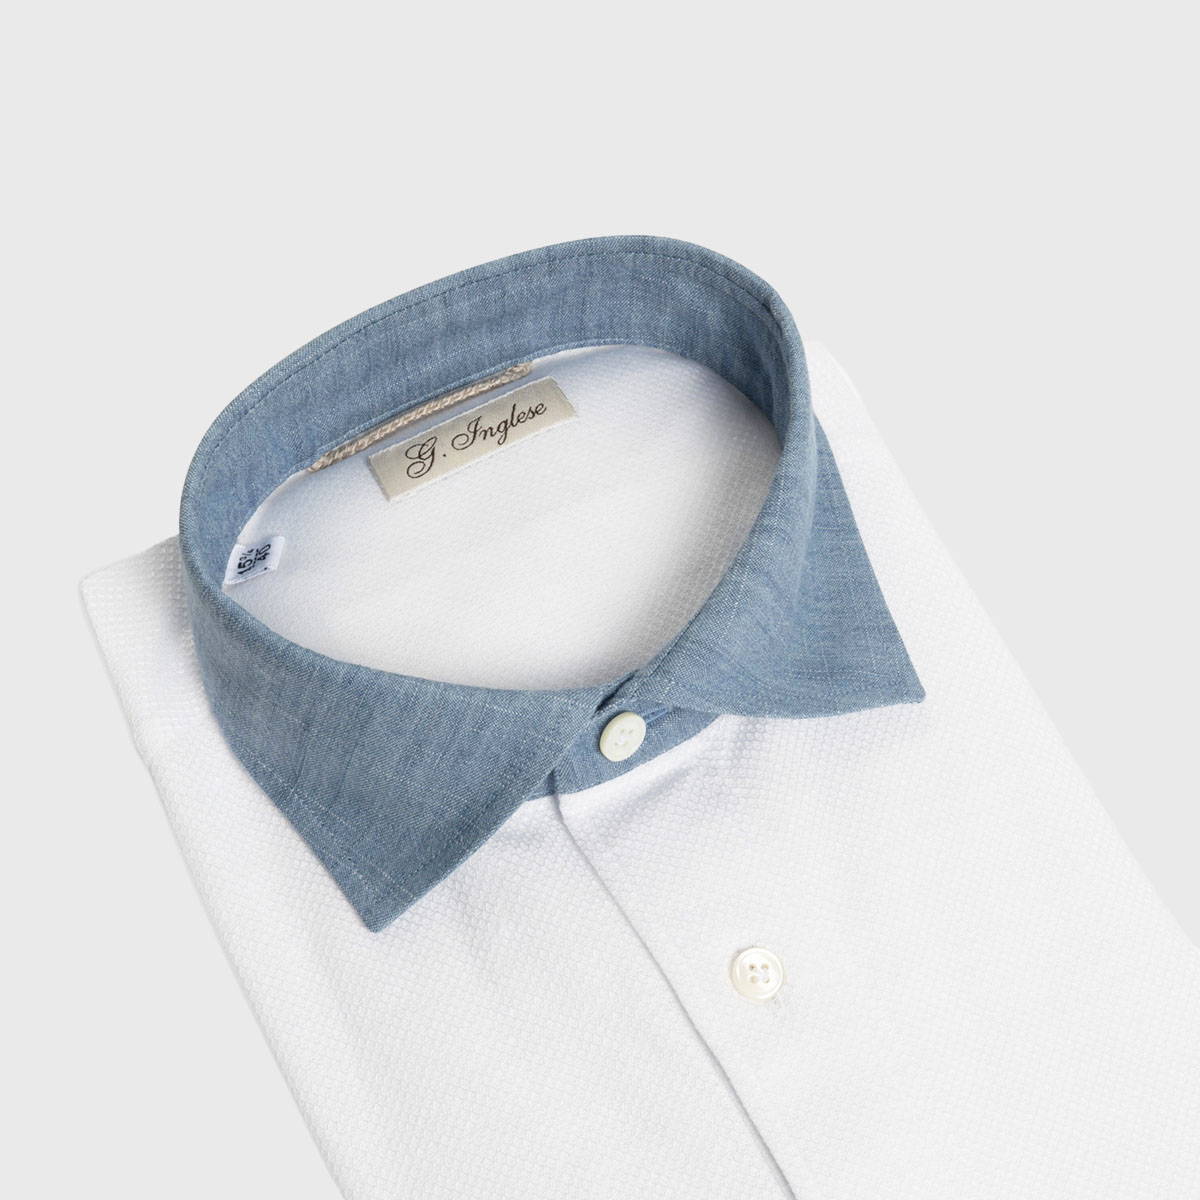 Piquet Polo Shirt in White Cotton and Denim Collar G. Inglese on sale 2022 2